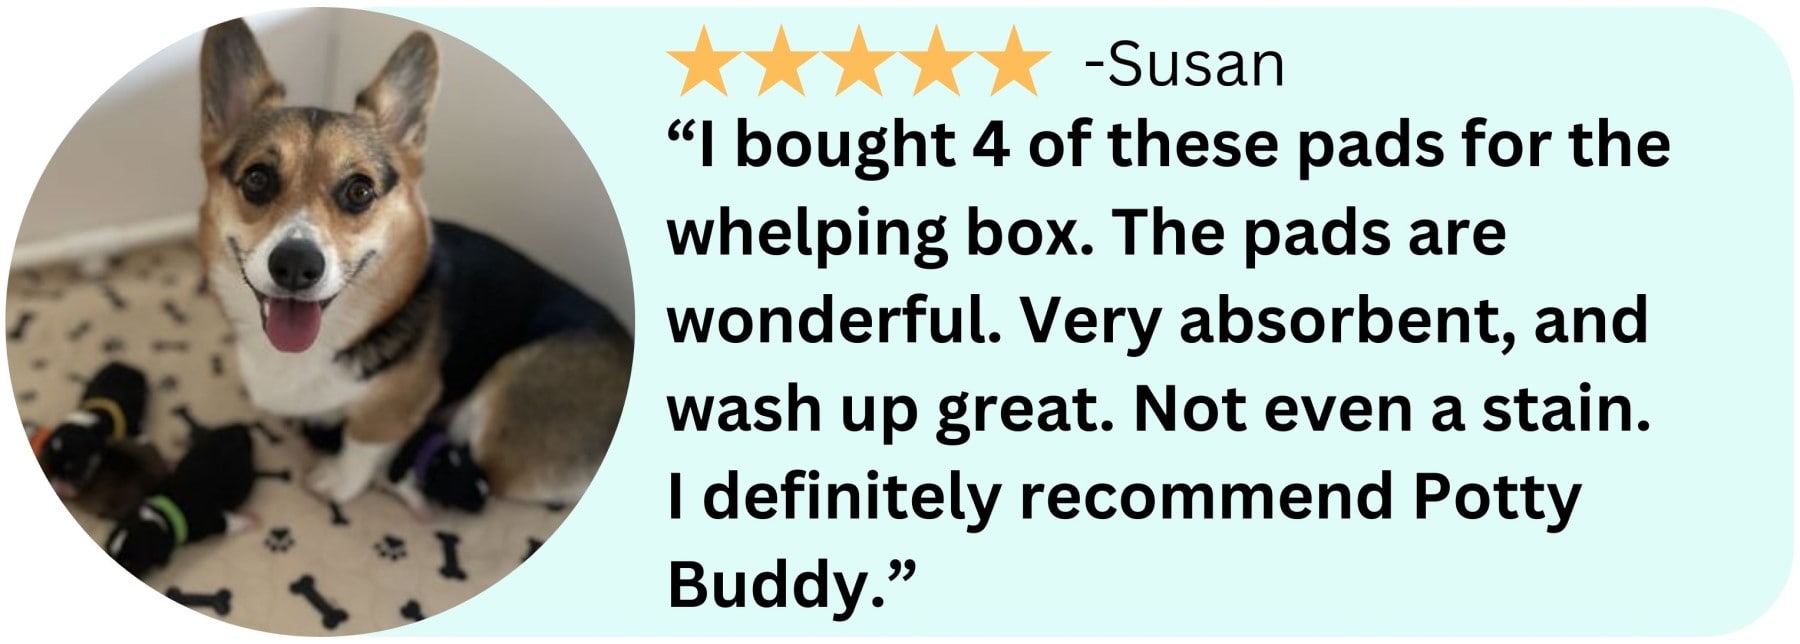 A review image of Potty Buddy pads, featuring a Corgi and her puppies in a playpen.